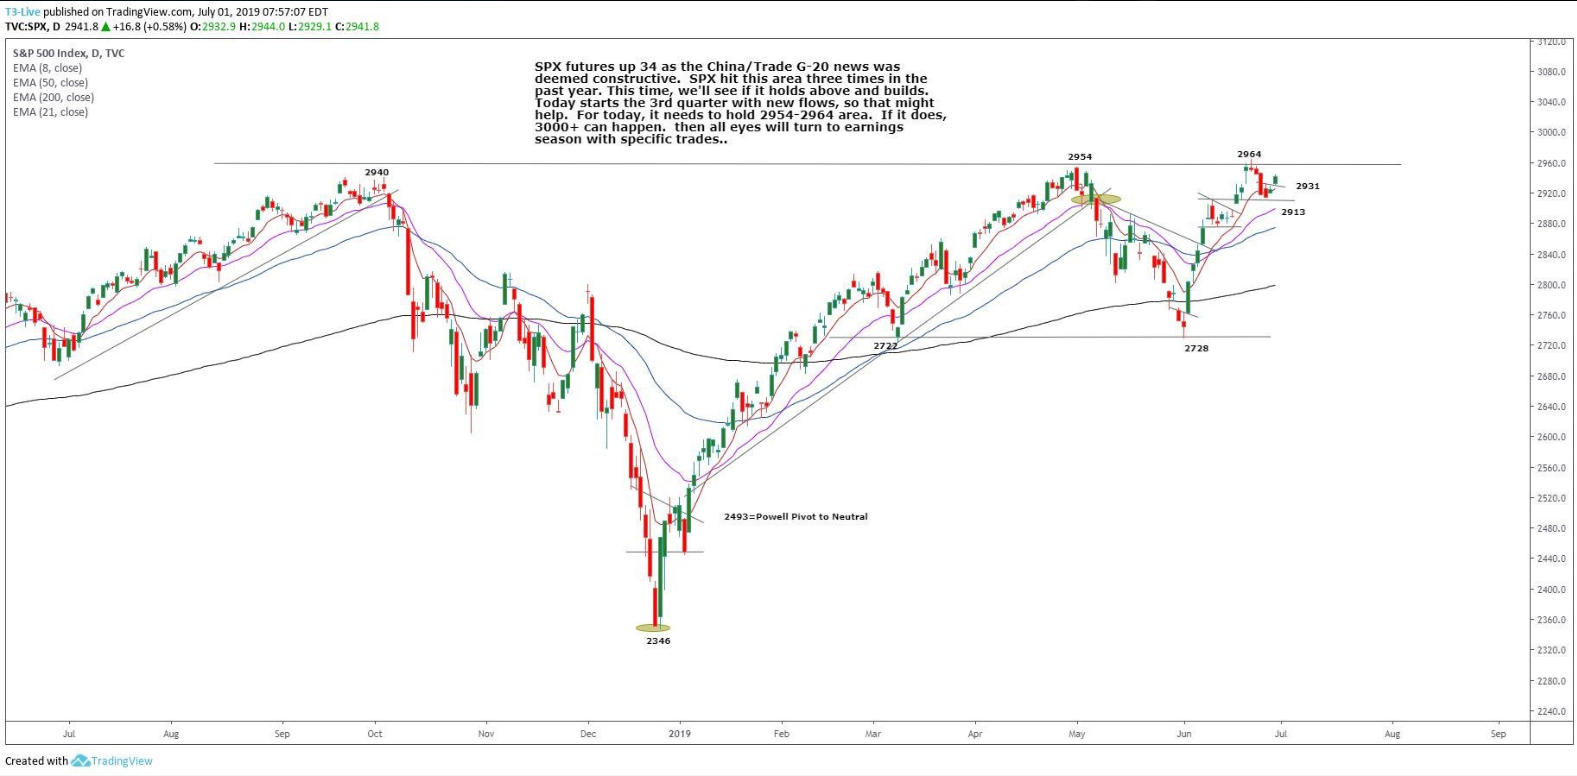 S&P 500 Index Daily